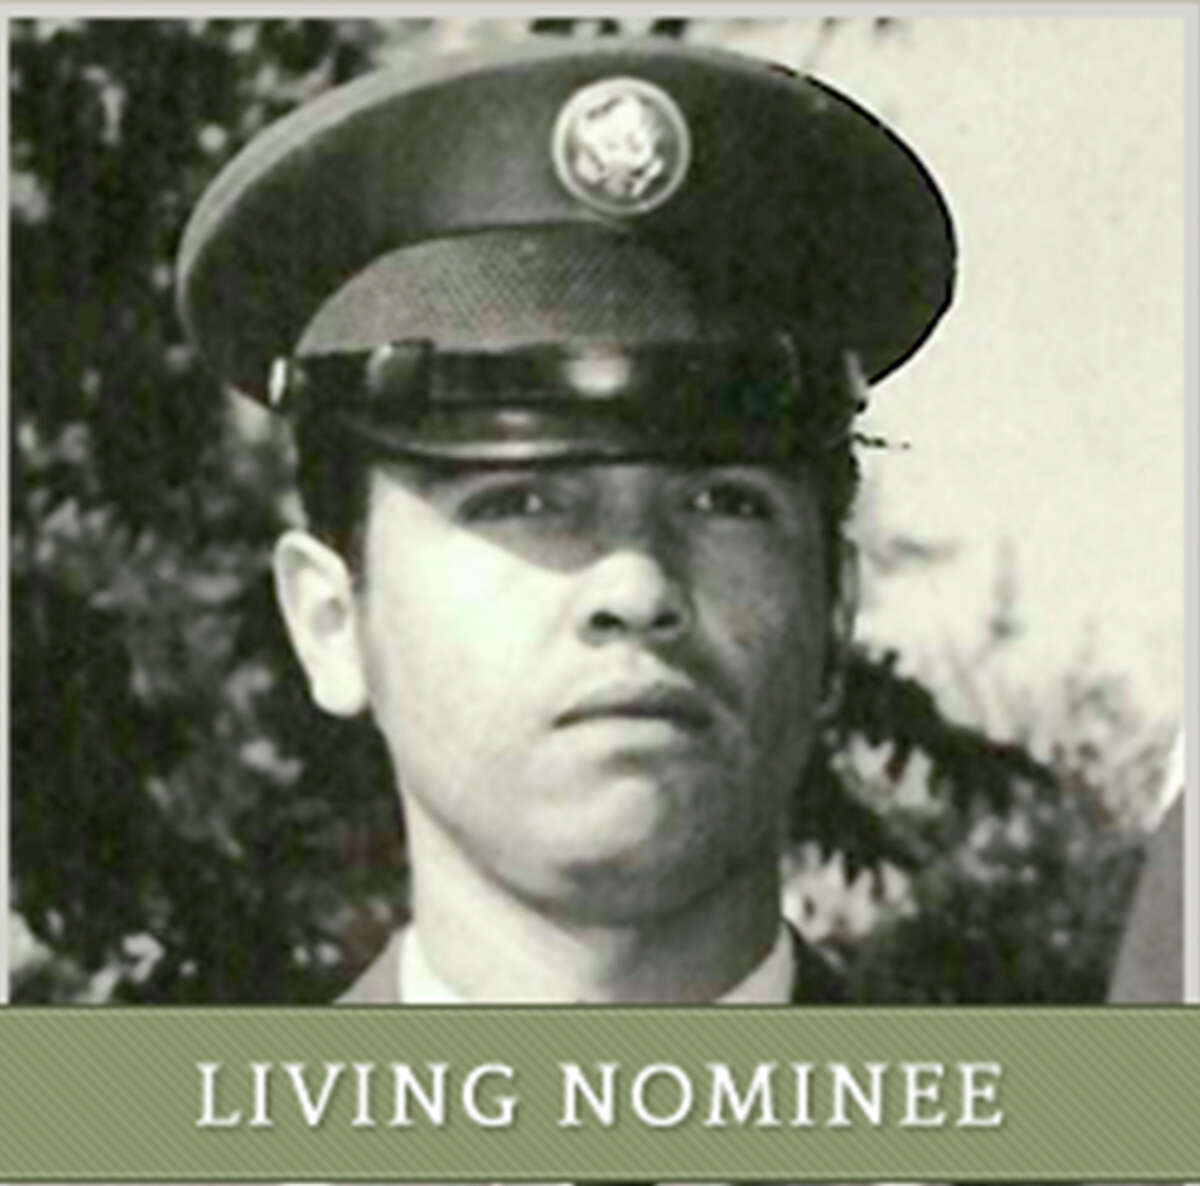 Medal of Honor nominee Sgt. Santiago Erevia was born in Nordheim, Texas, in 1946. He volunteered to join the U.S. Army in San Antonio when he was 22-years-old. Then-Spc. 4 Erevia distinguished himself May 21, 1969, while serving as a radio-telephone operator during a search-and-clear mission near Tam Ky City, in the Republic of Vietnam. In 1970, Erevia left active service with a two year reserve obligation. In 1972 he joined the Texas National Guard and went on to serve 17 years. Erevia also found employment with the U.S. Postal Service; after 32 years of public service there, he retired in 2002. Erevia has four grown children and lives in San Antonio with his wife. These days he enjoys refurbishing his home and walking to stay fit. In addition to the Medal of Honor, Erevia received the Distinguished Service Cross (this award will be upgraded to the Medal of Honor on Mar. 18), Bronze Star Medal, Purple Heart, Air Medal, Army Commendation Medal, National Defense Service Medal, Vietnam Service Medal with five Bronze Service Stars, Combat Infantryman Badge, Sharpshooter Marksmanship Badge with Auto Rifle Bar, Marksman Marksmanship Badge with Rifle Bar, Republic of Vietnam Campaign Medal with "60" Device, Republic of Vietnam Gallantry Cross with Gold Star Device and Republic of Vietnam Civil Actions Honor Medal, First Class.